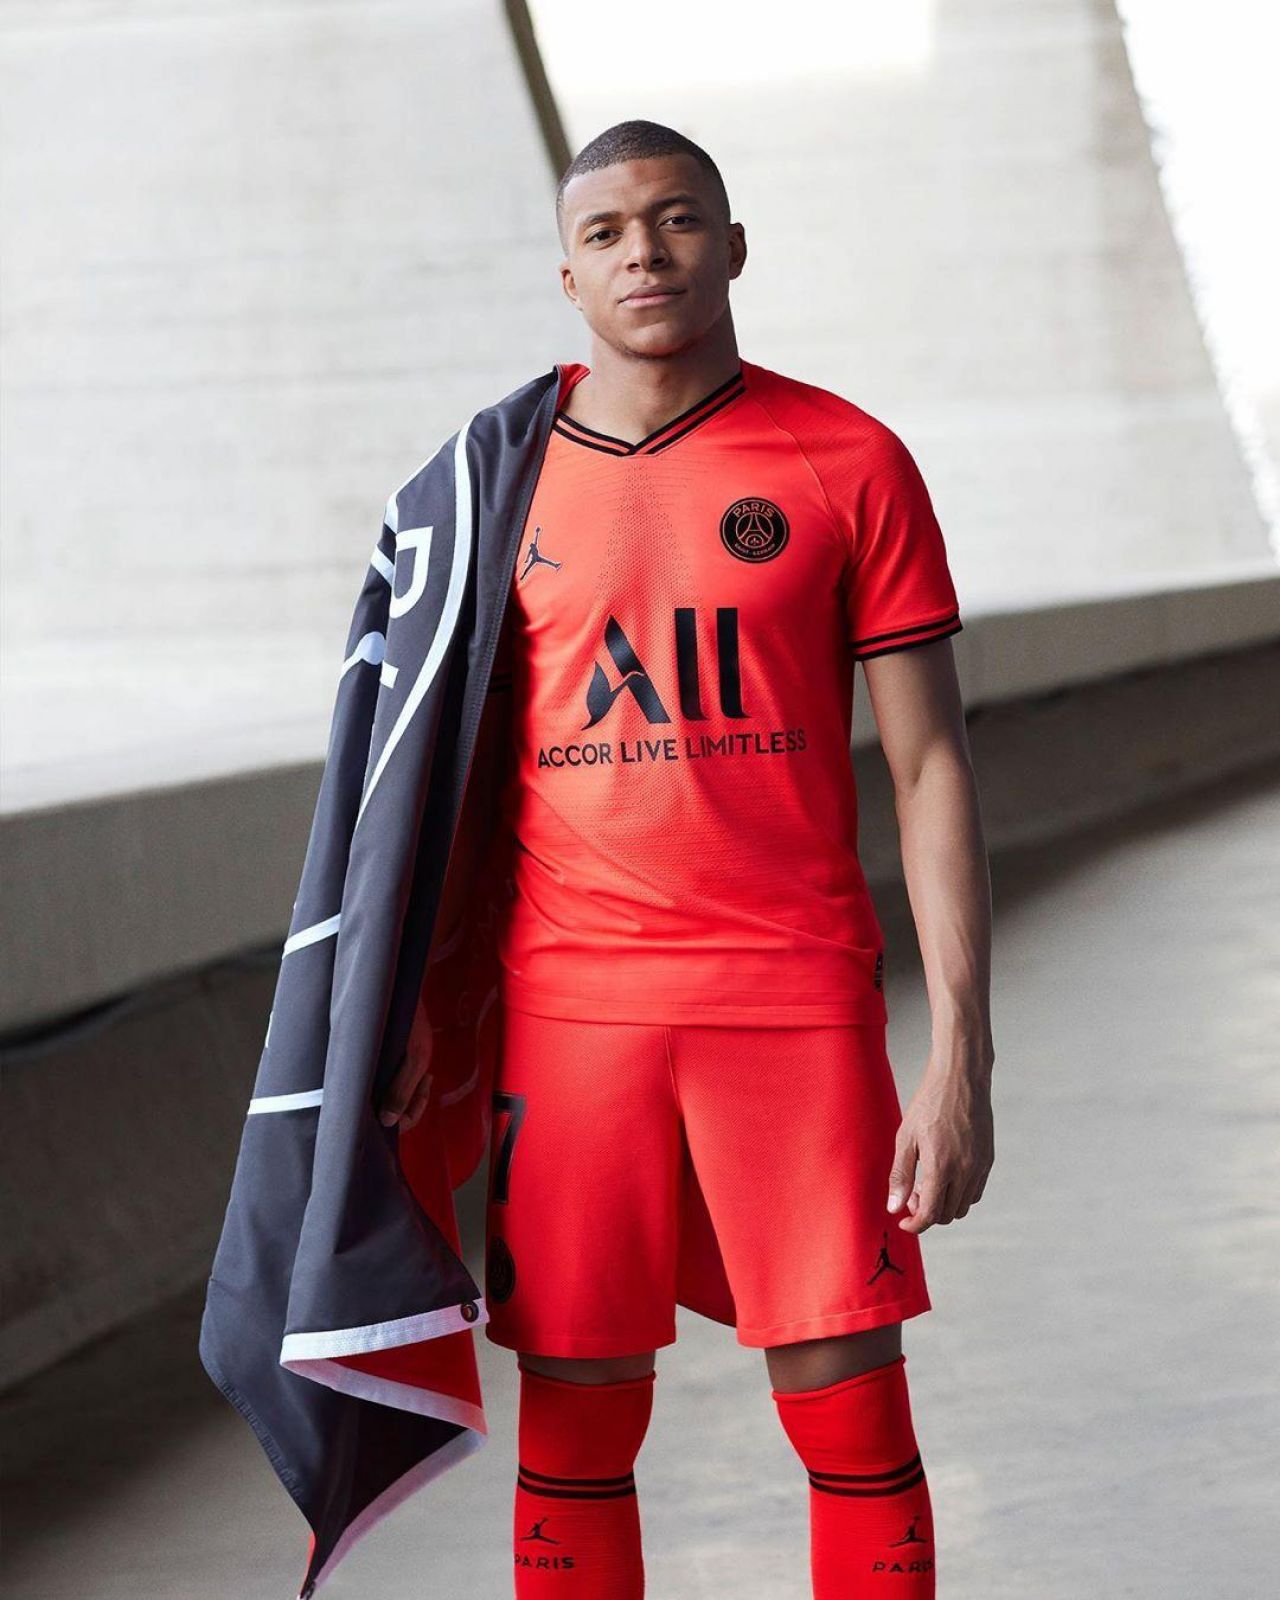 The Nike Jordan of the PSG red orange worn by Kylian Mbappé on the ...